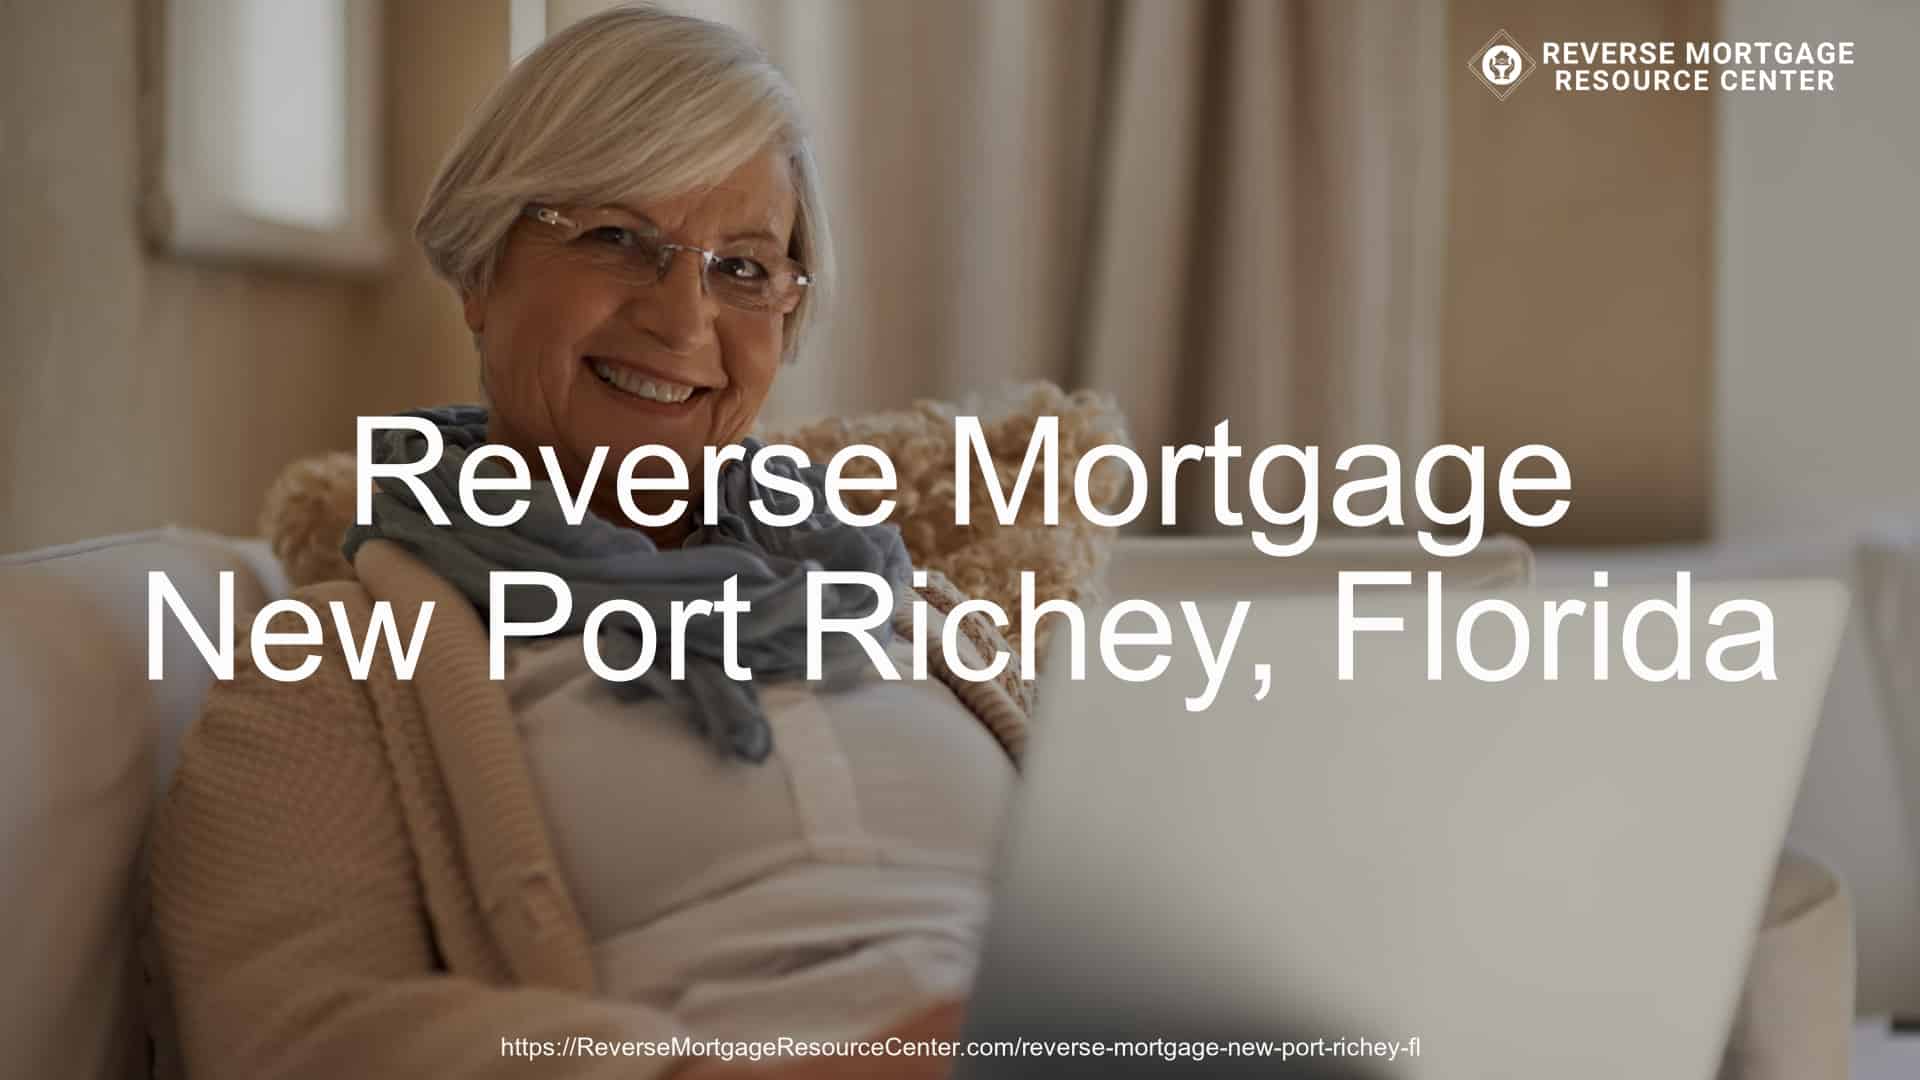 Reverse Mortgage Loans in New Port Richey Florida